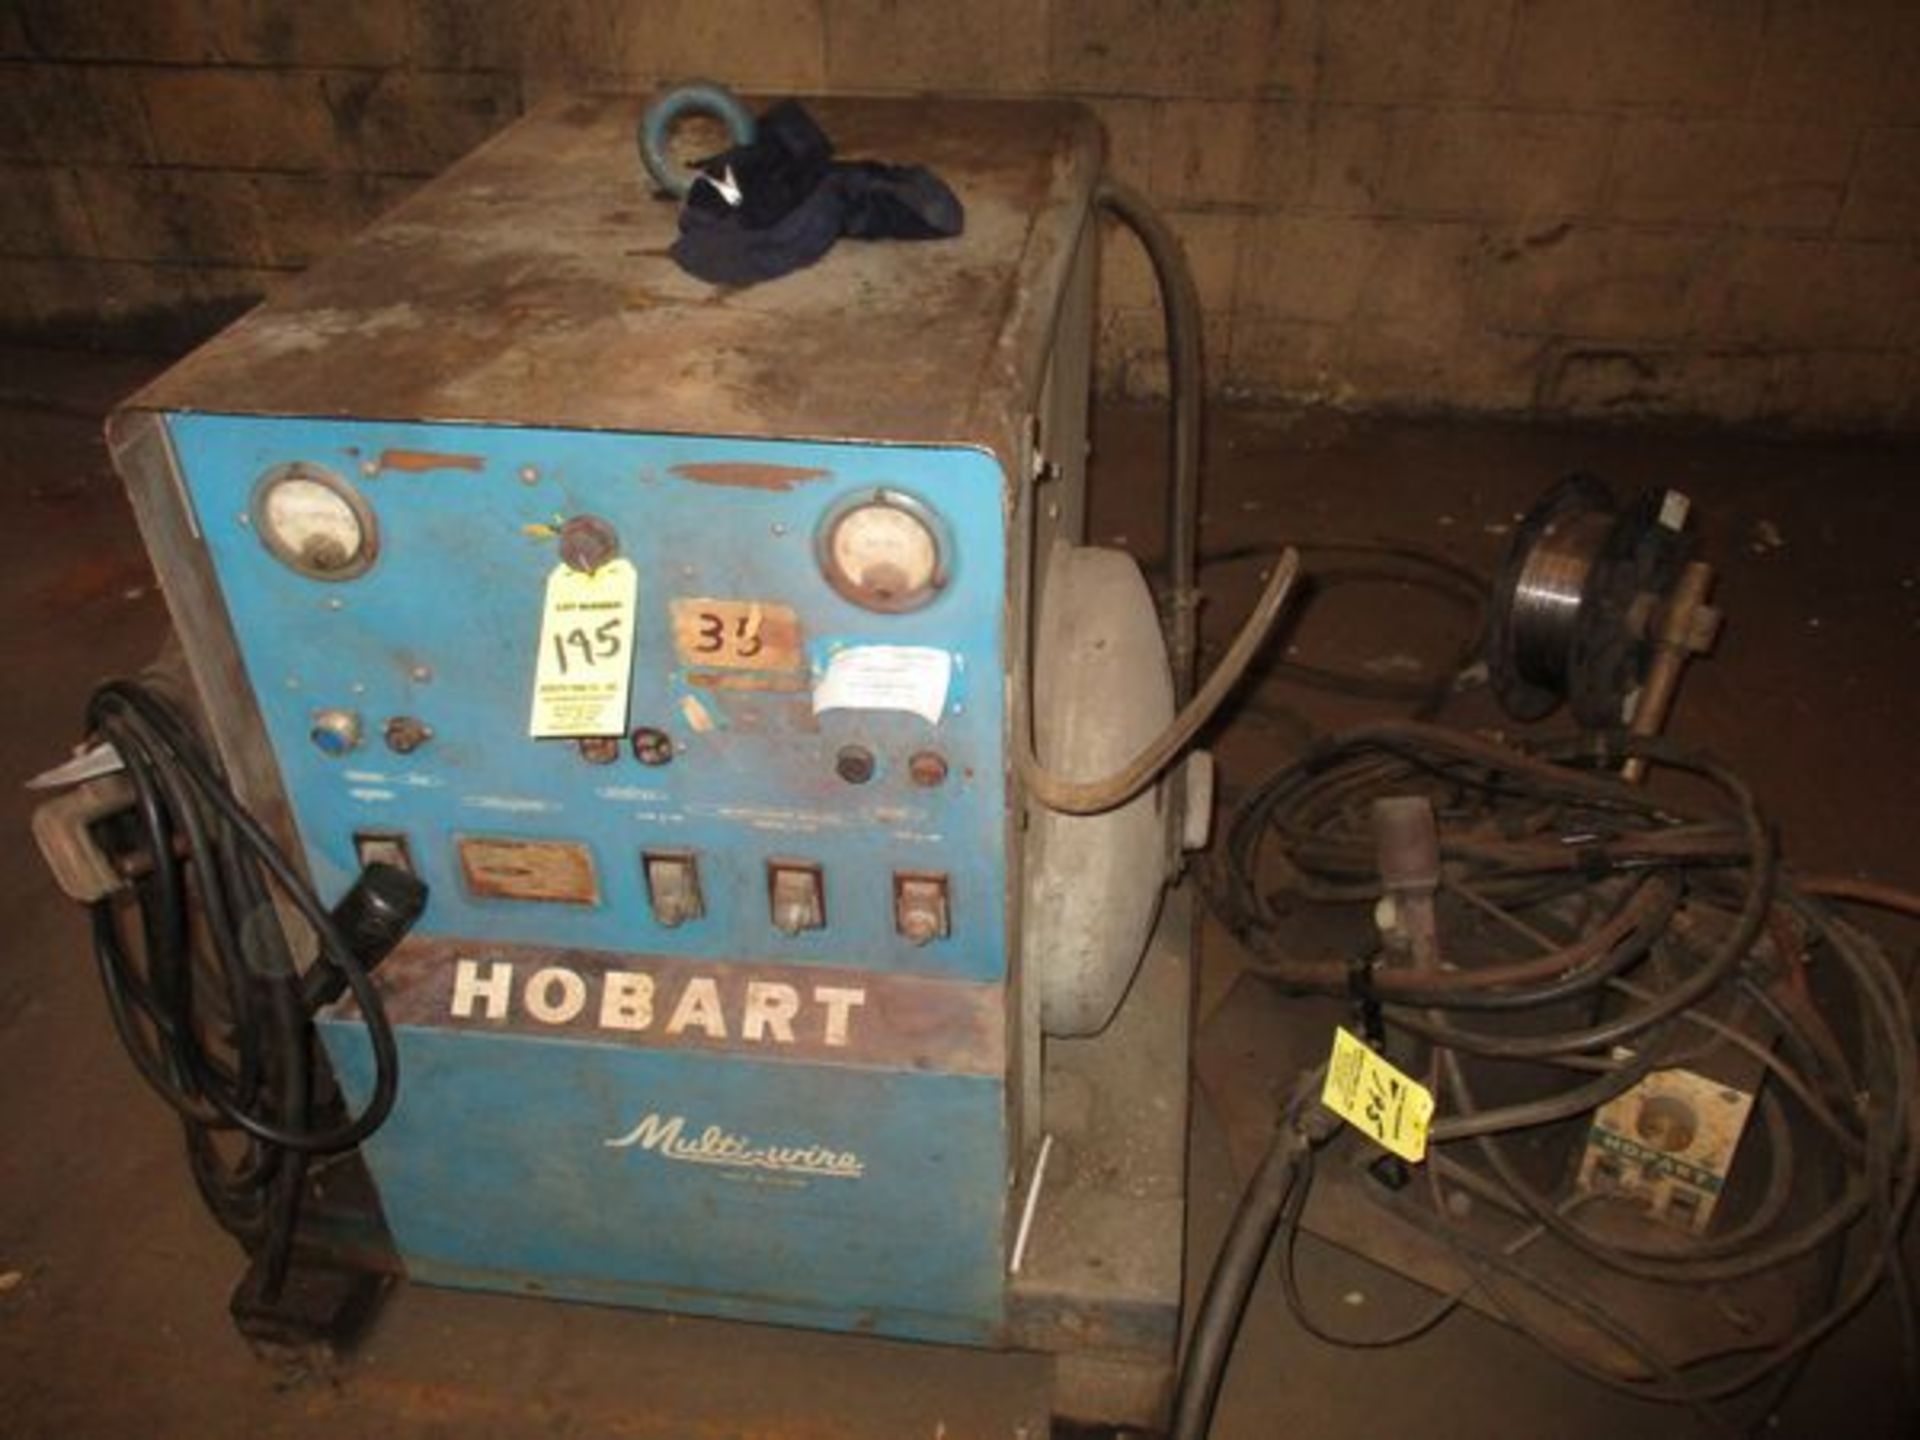 HOBART MULTI-WIRE 500 AMP WELDER, NO CABLE